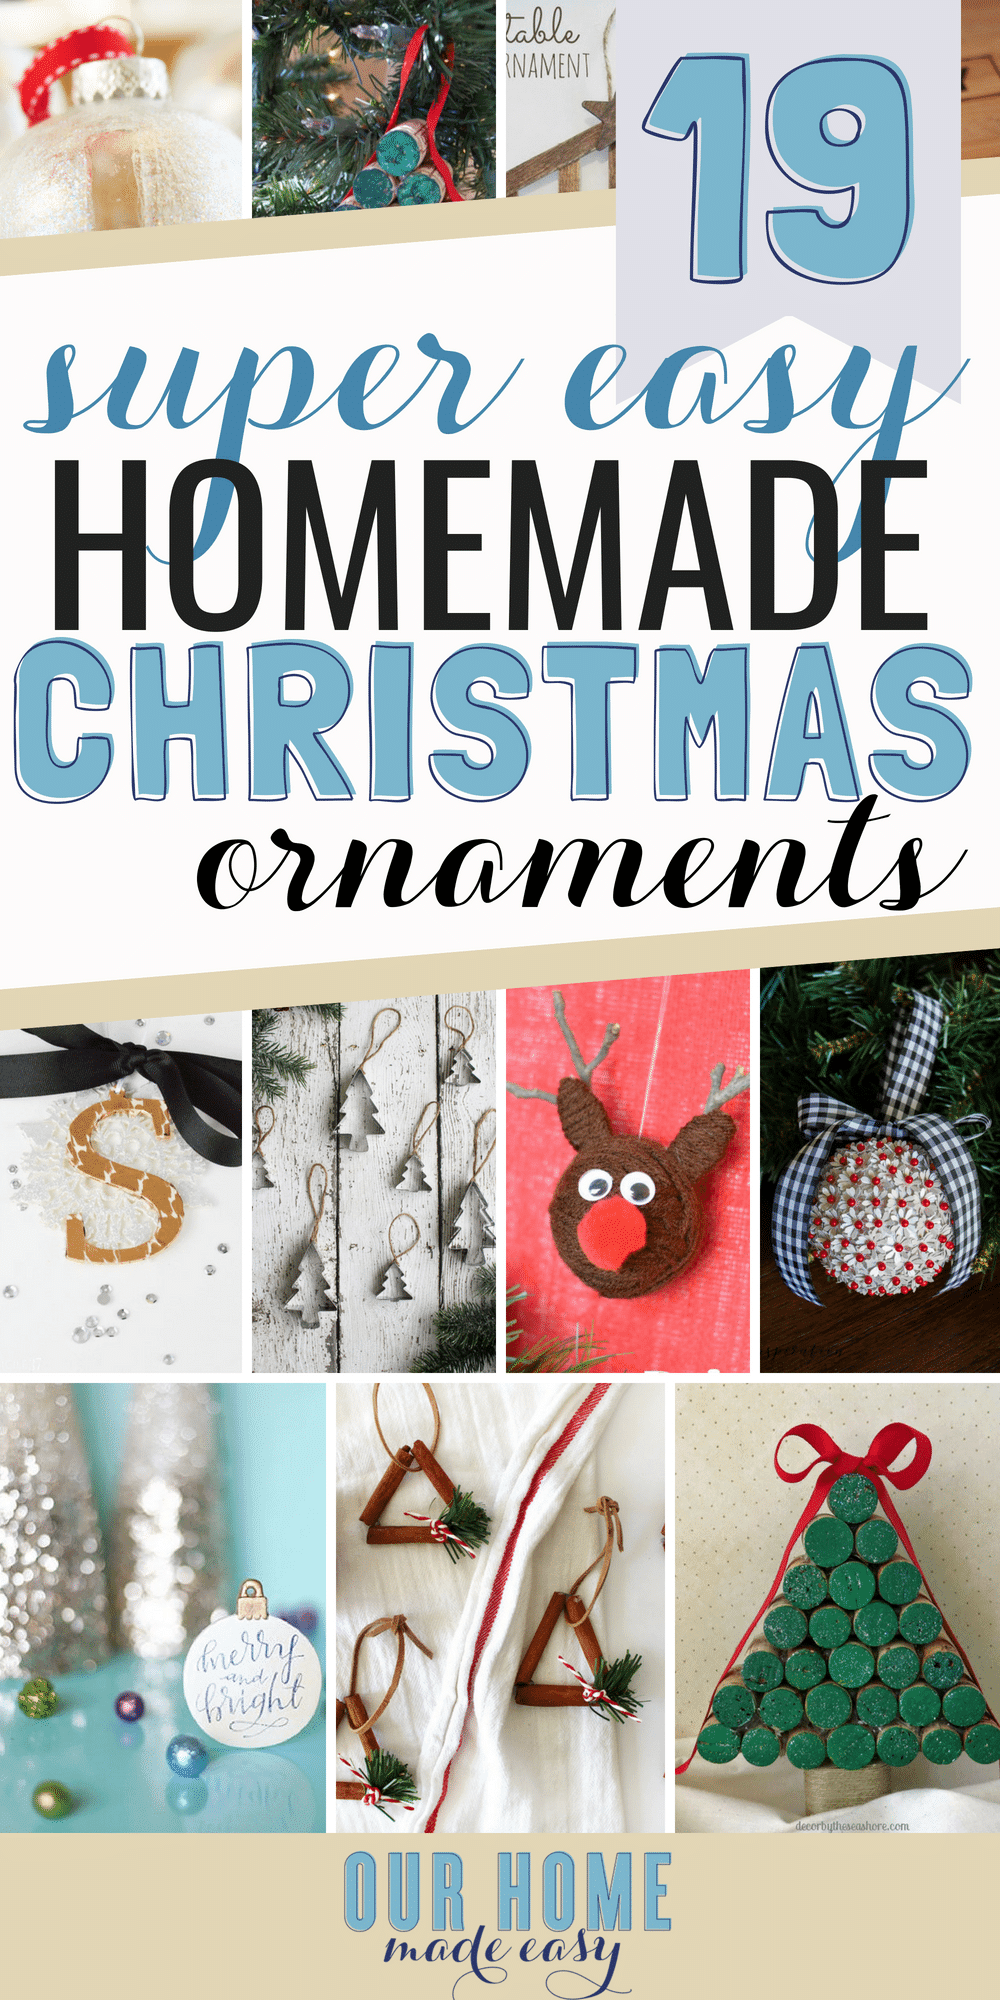 19 Super Easy Homemade Christmas Ornaments and DIY Crafts